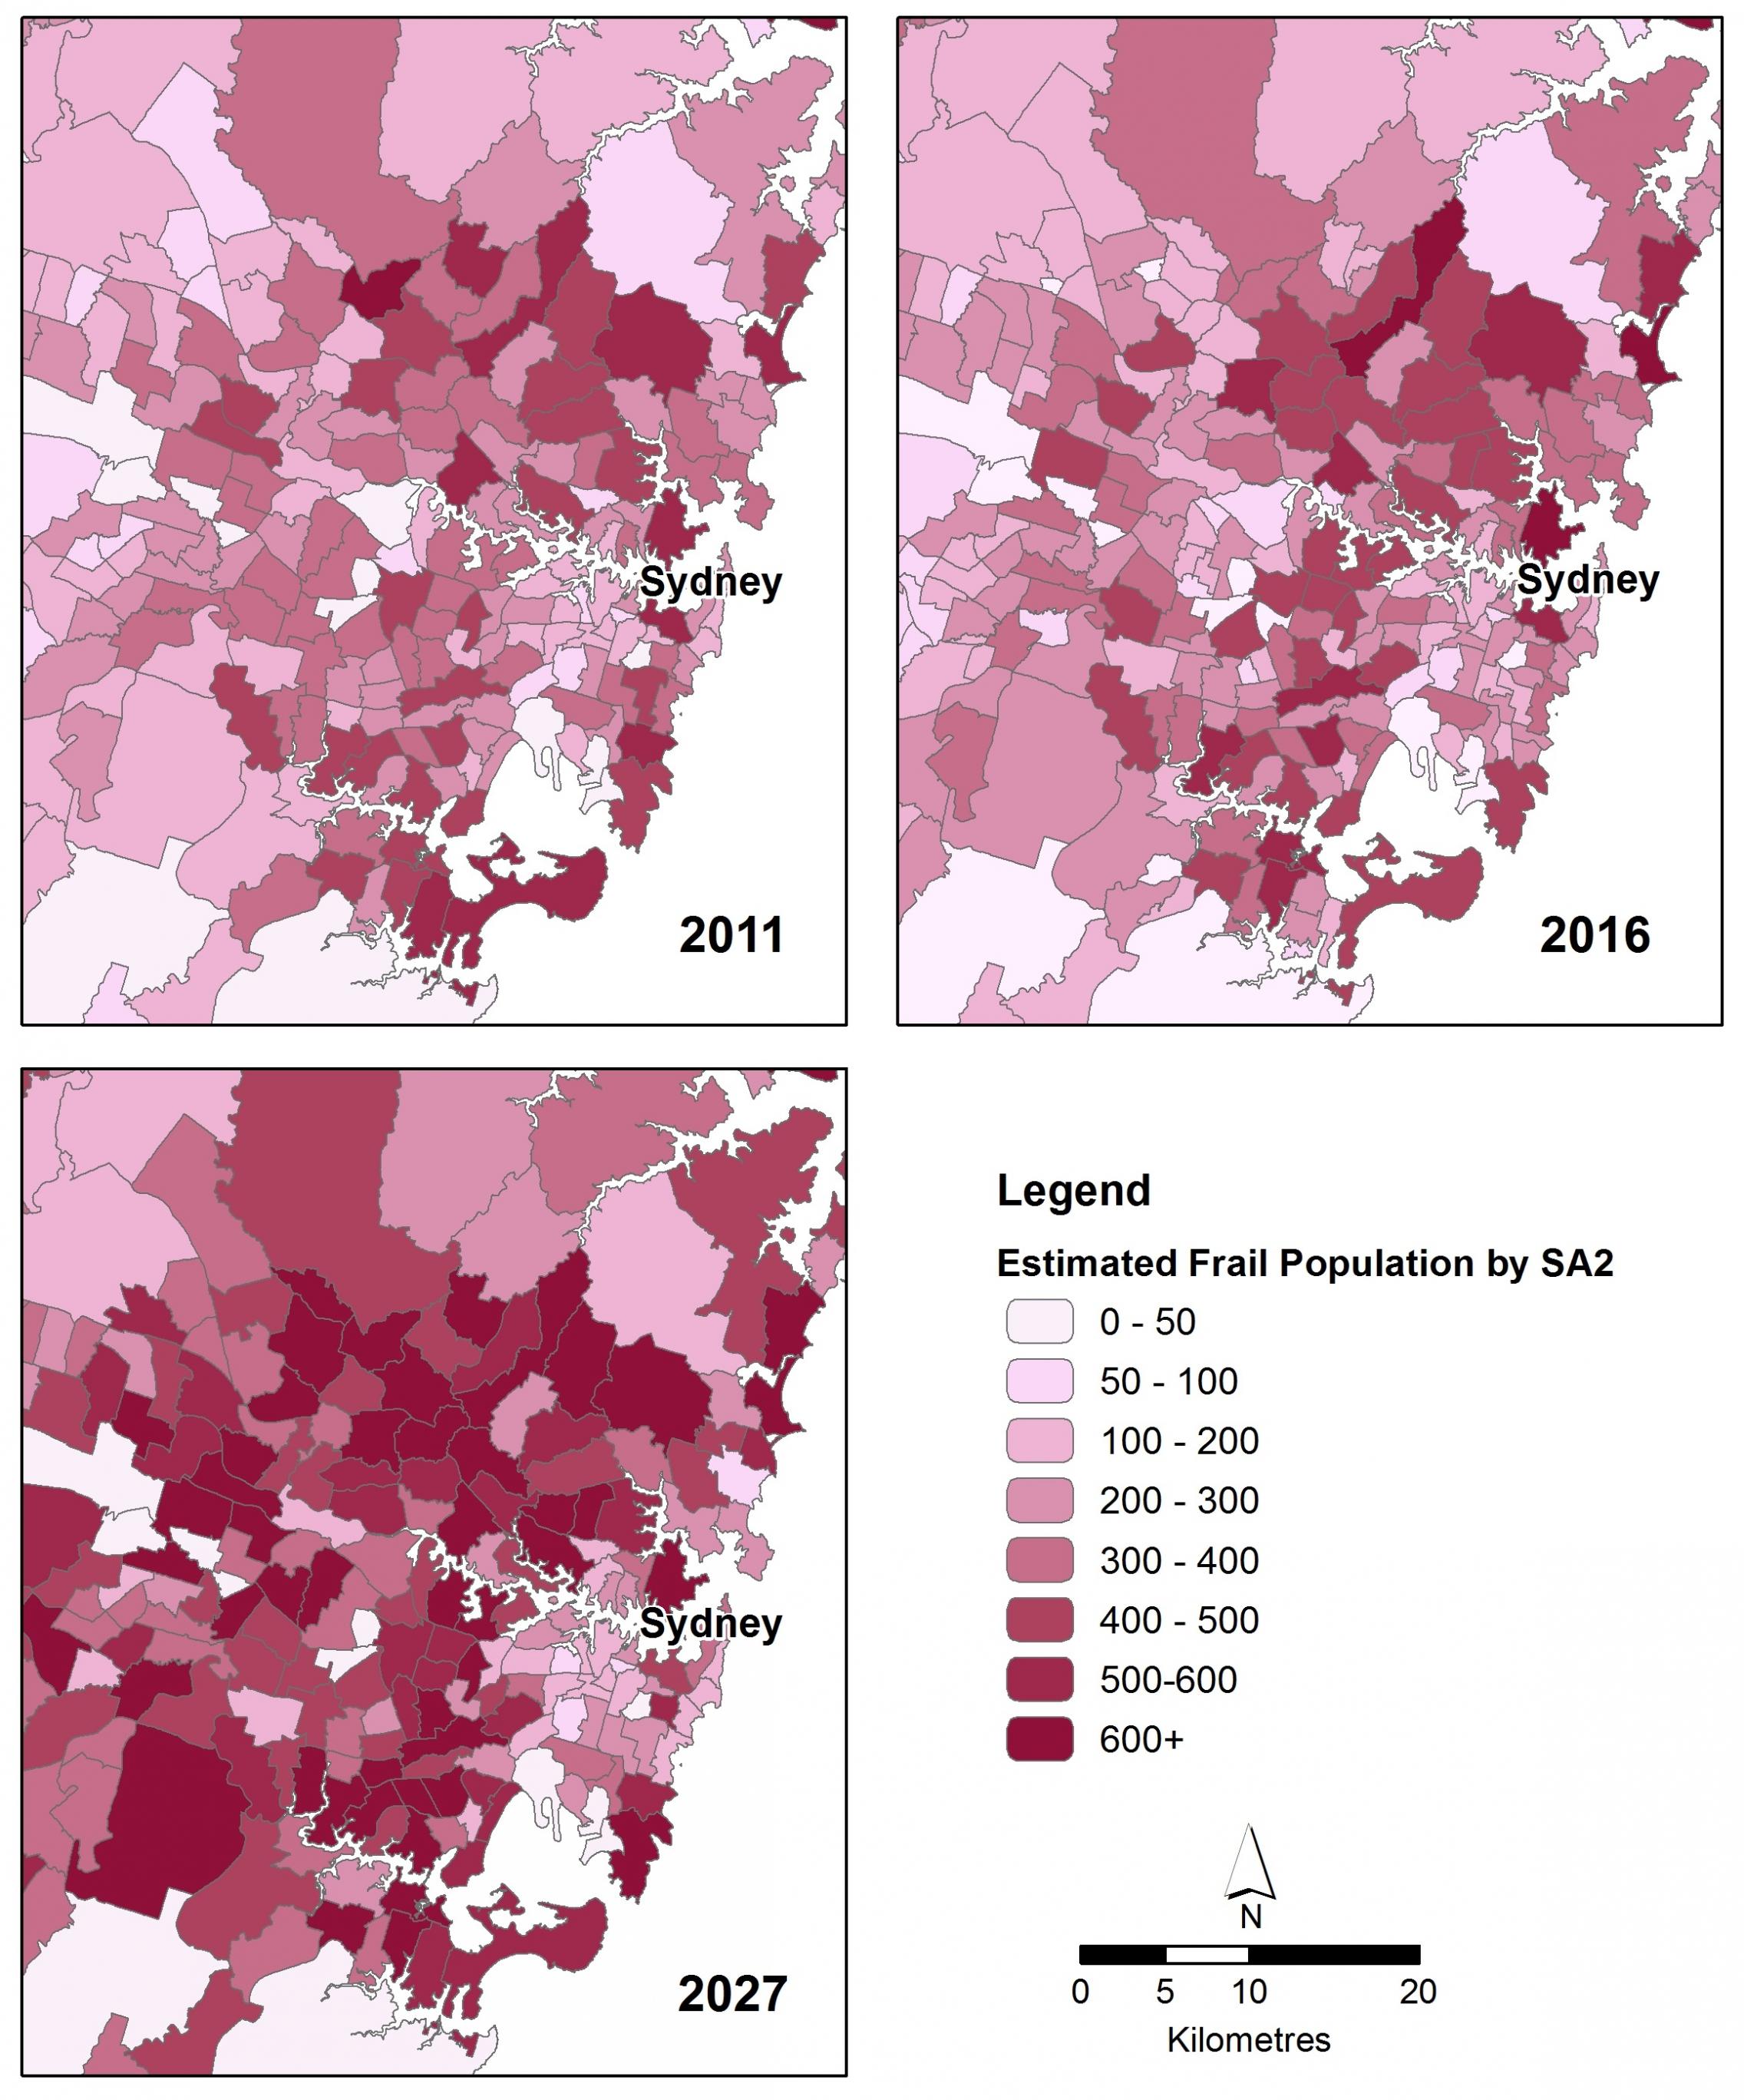 Australia’s current and future frail populations – The frailty web maps